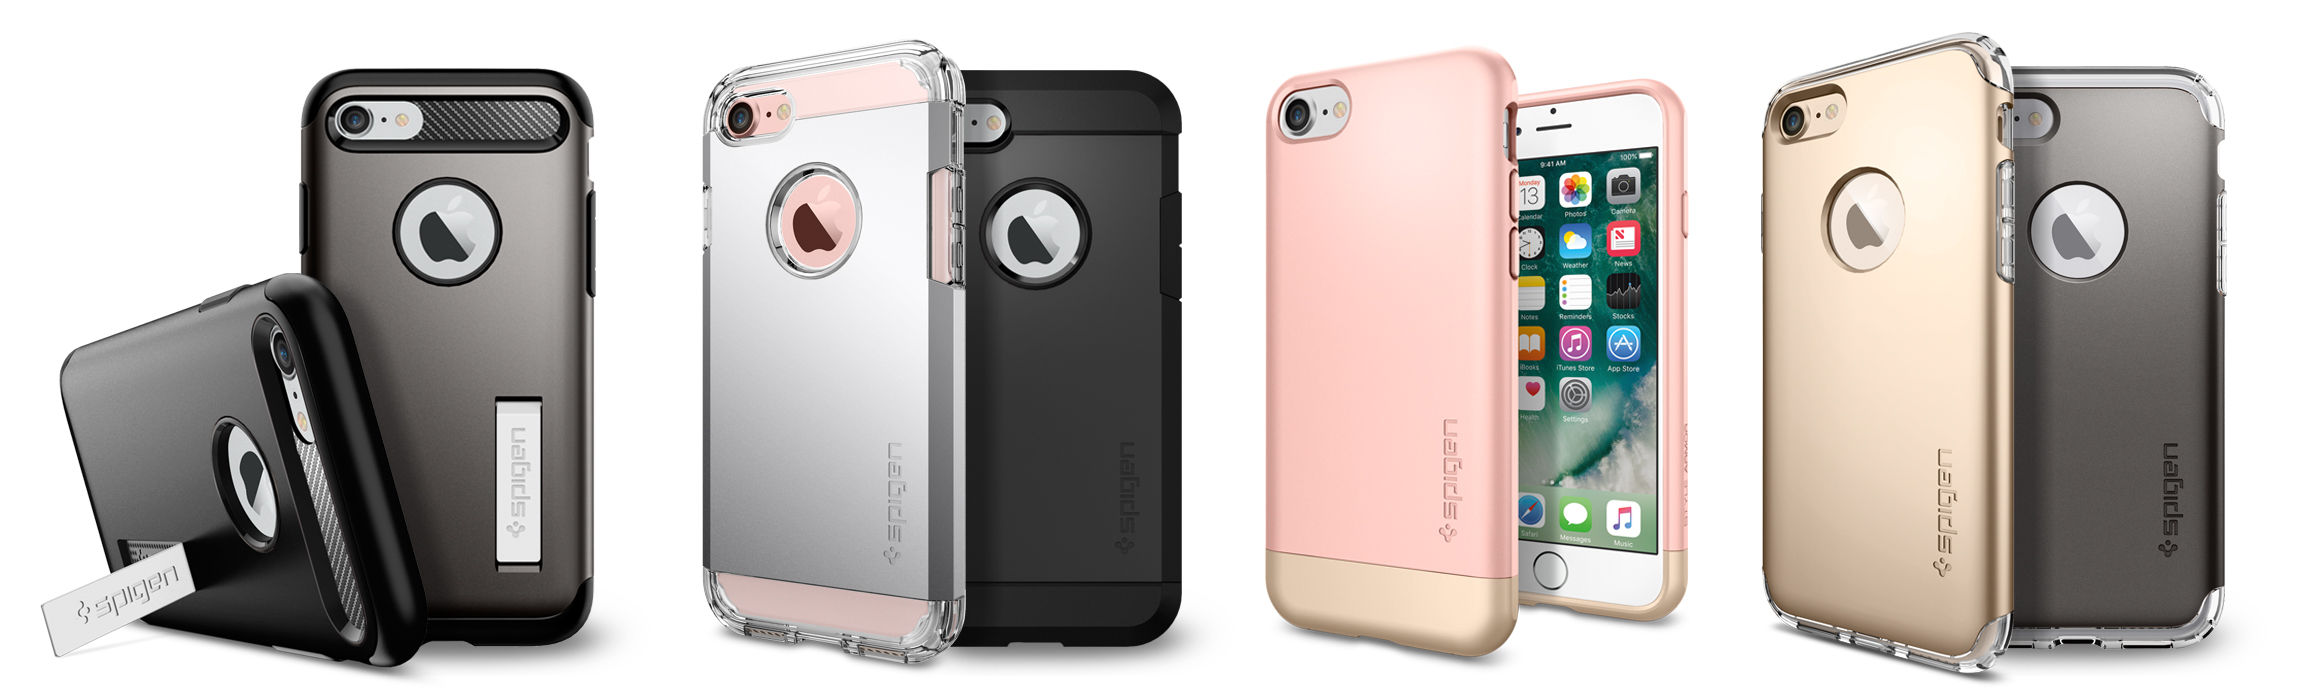 Spigen launches iPhone 7 & 7 Plus cases available now ahead of ...